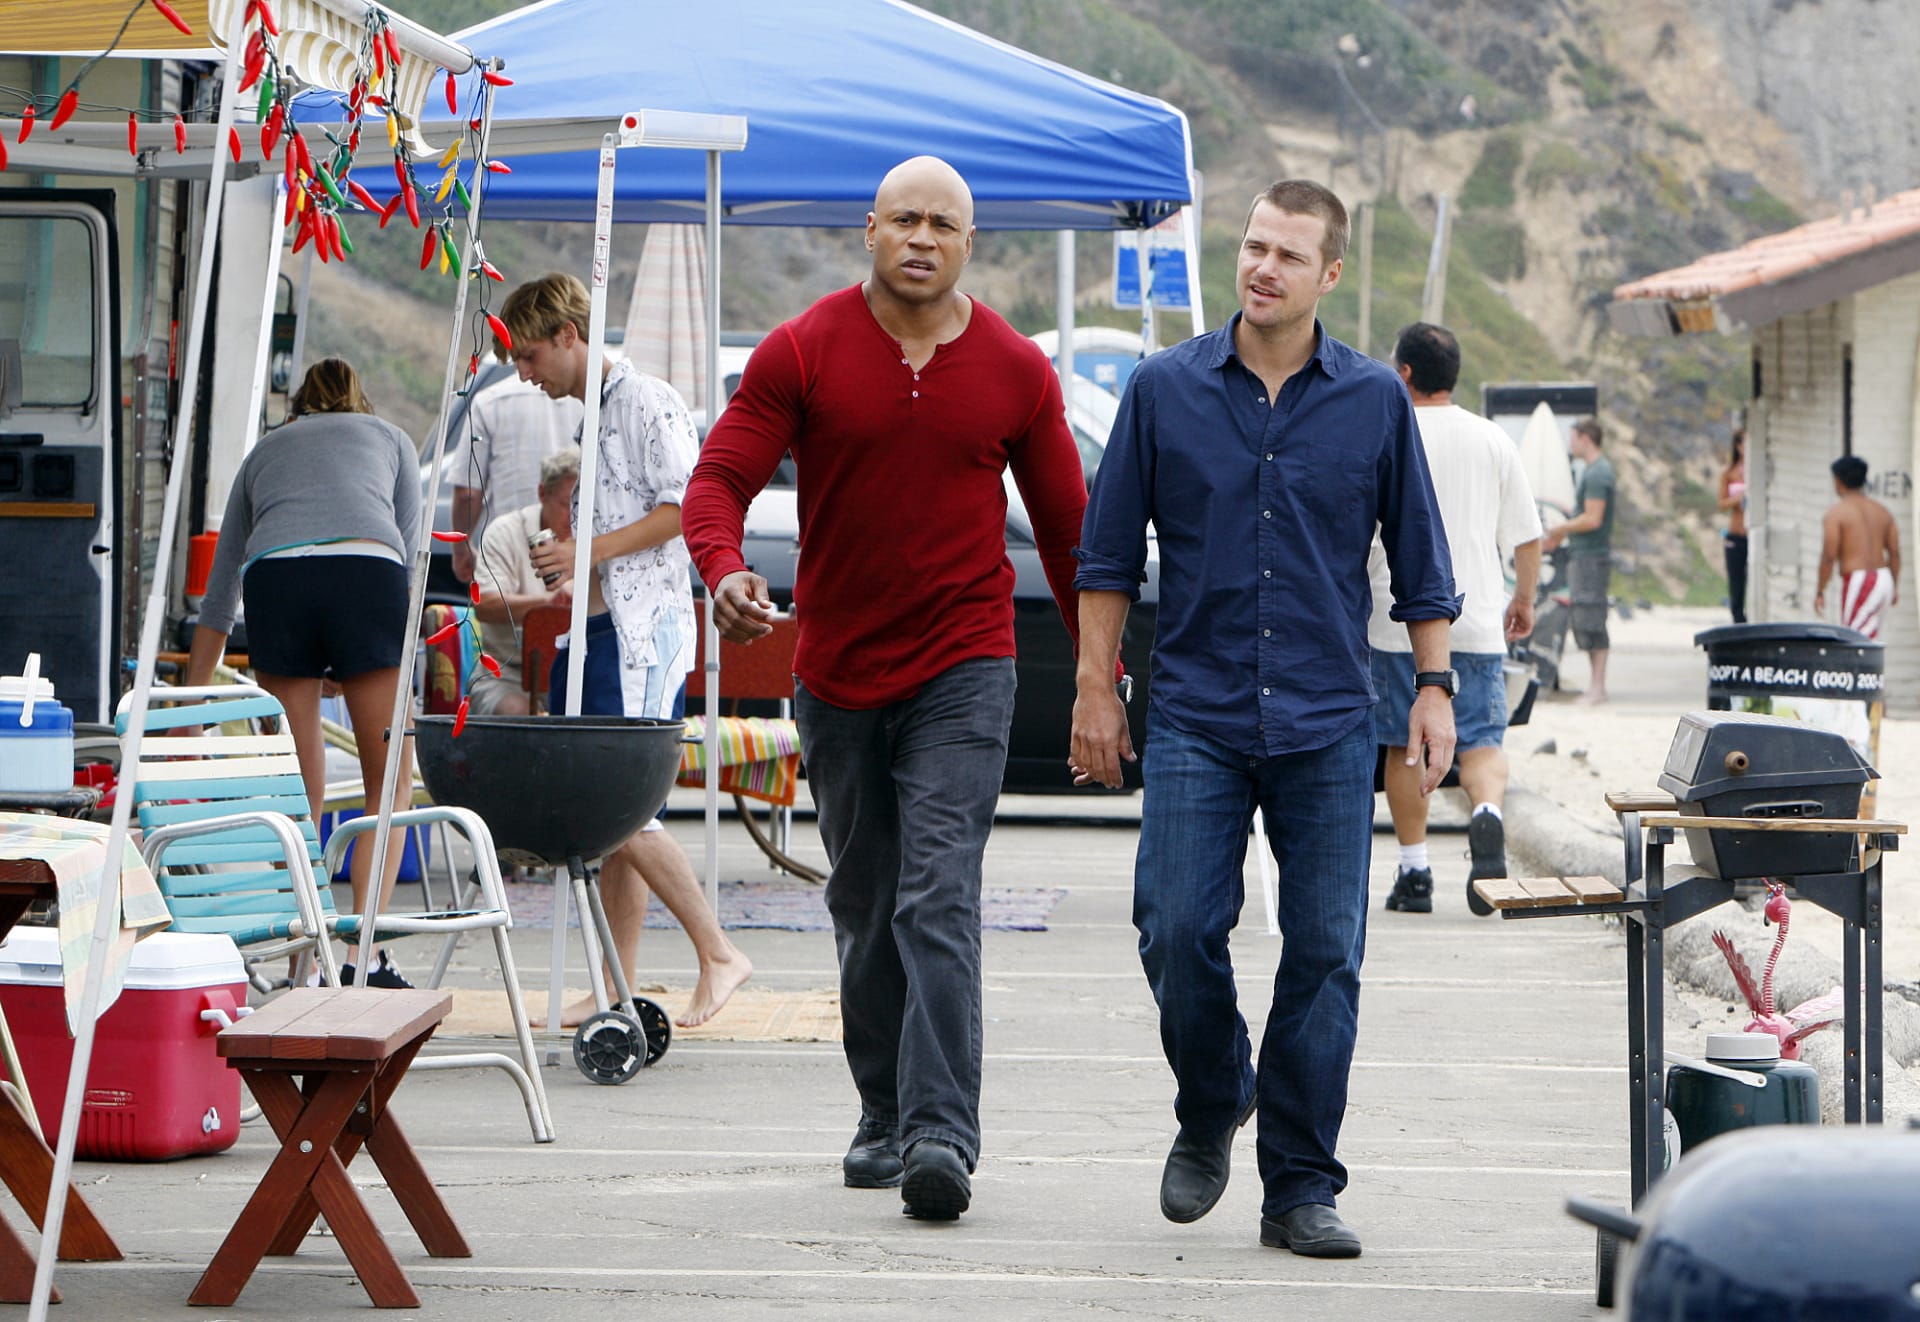 NCIS: Los Angeles - The Only Easy Day